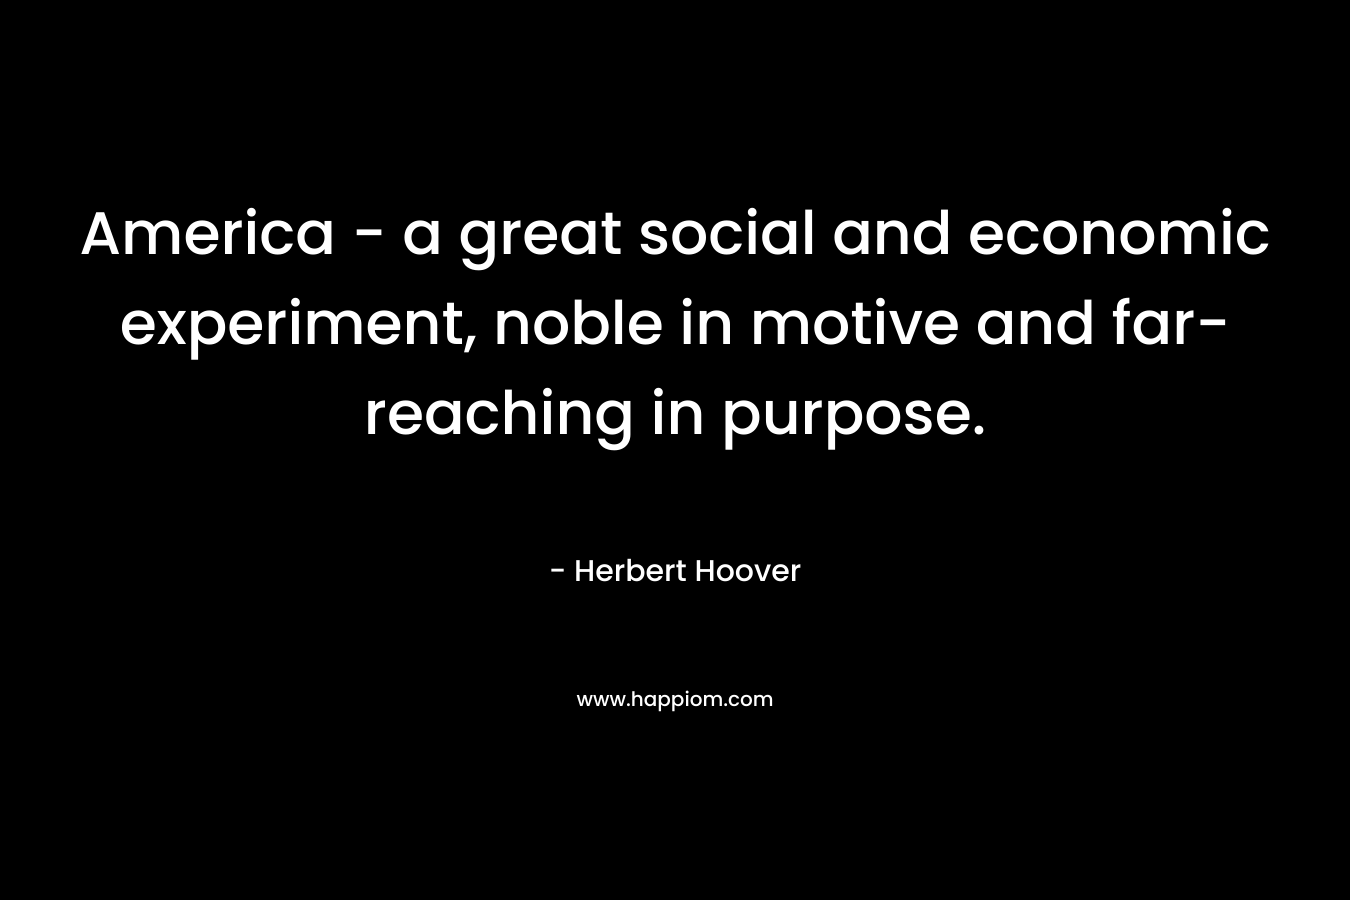 America - a great social and economic experiment, noble in motive and far-reaching in purpose.